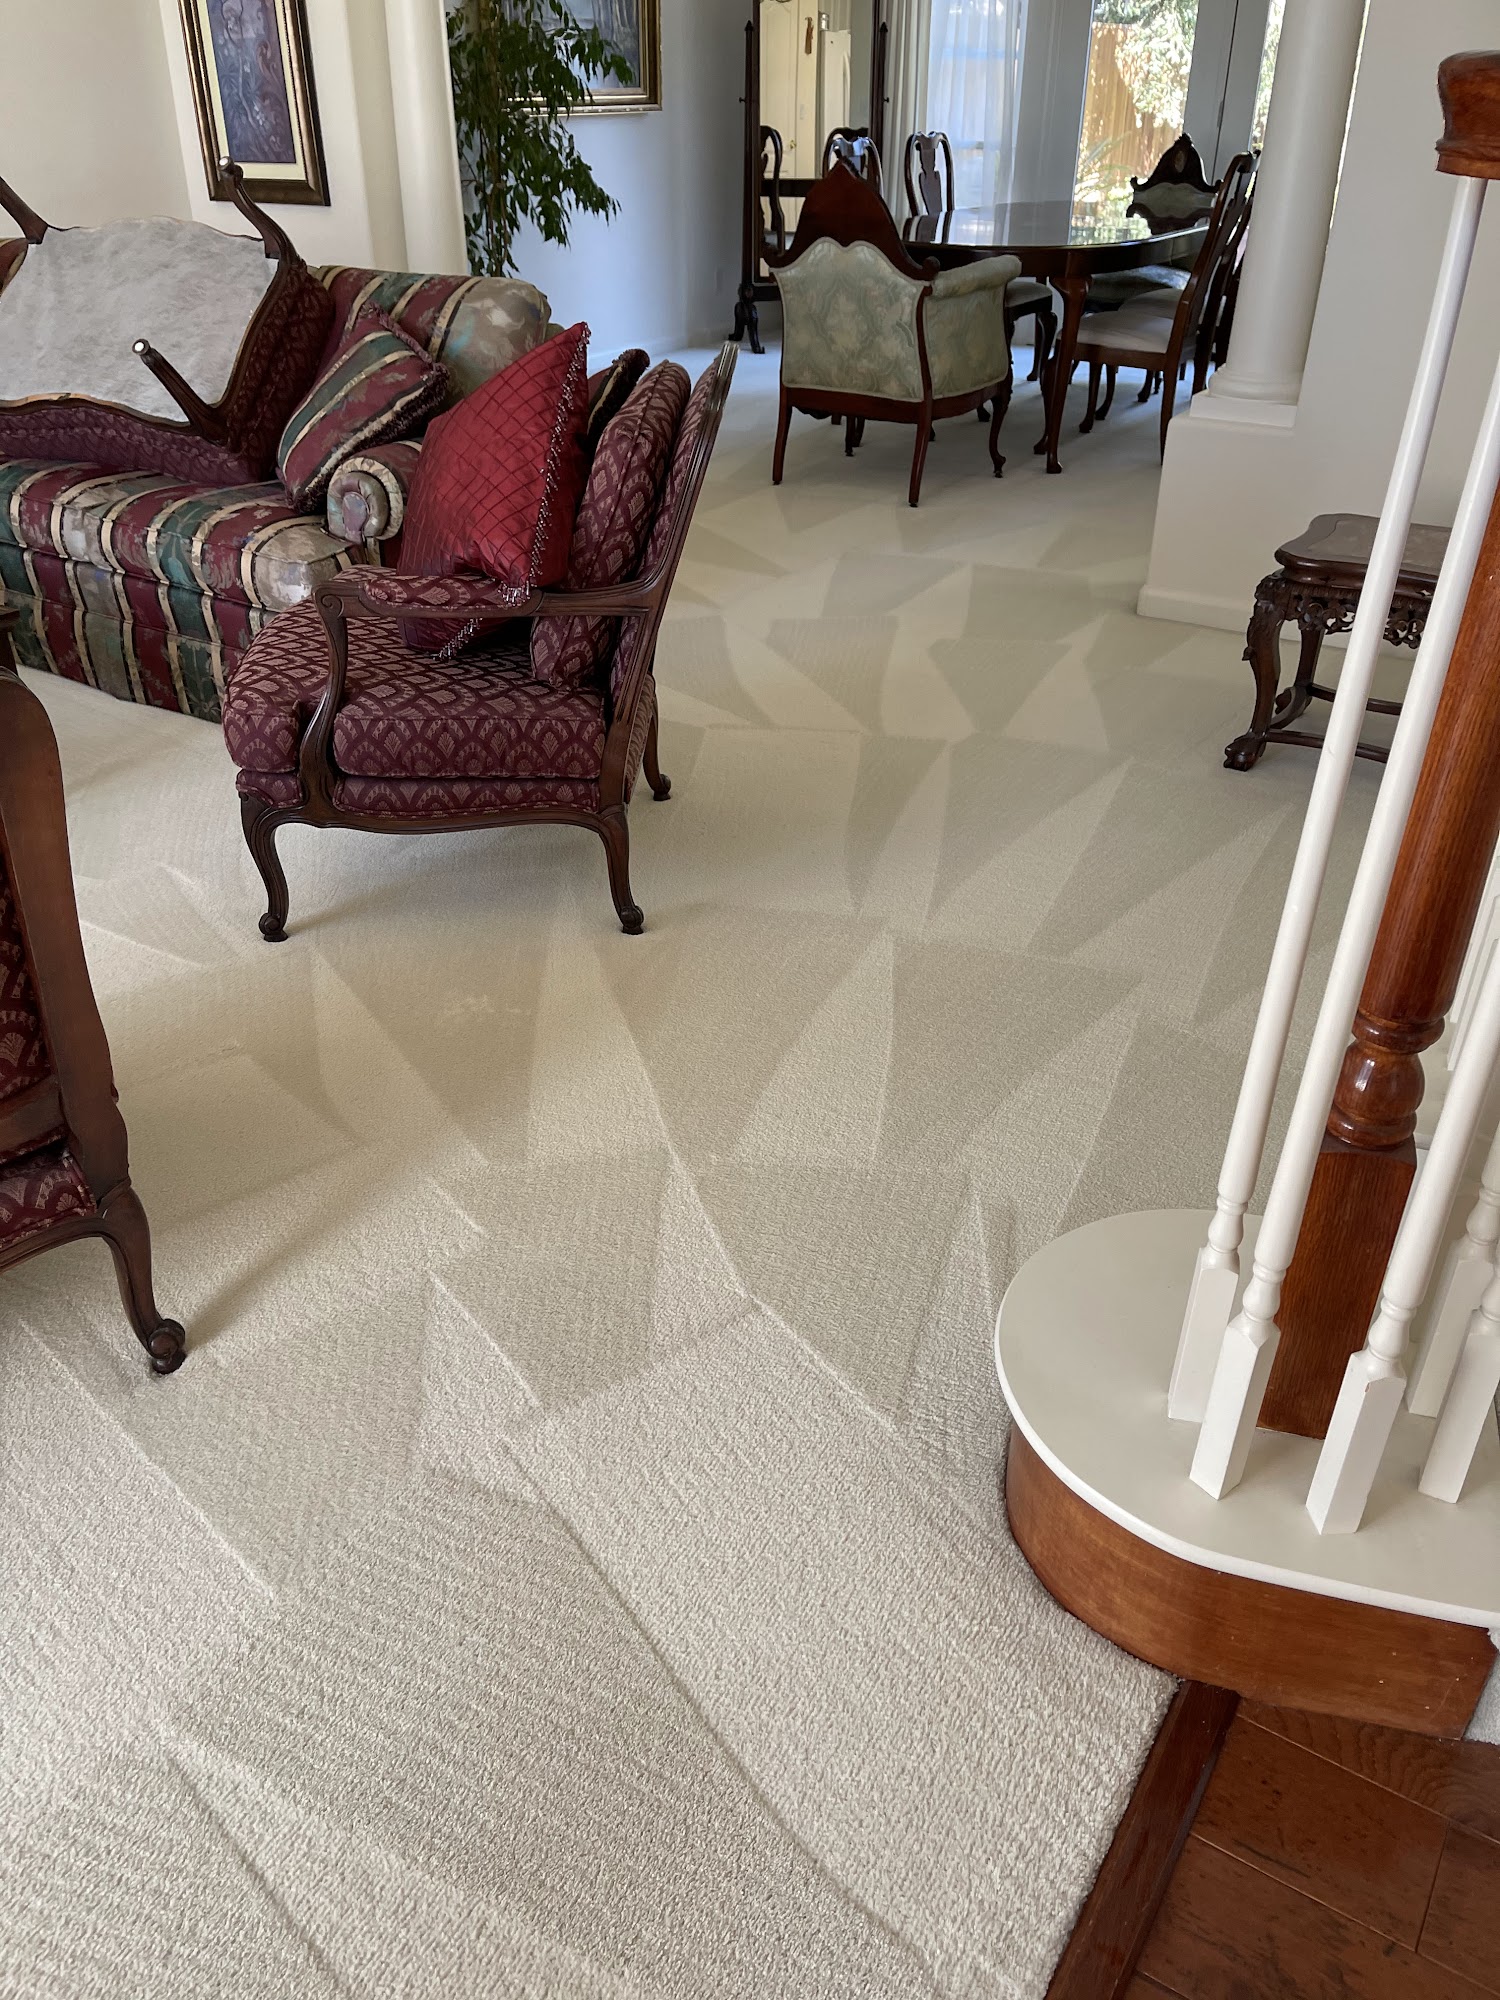 A-1 Steamway Carpet Cleaning